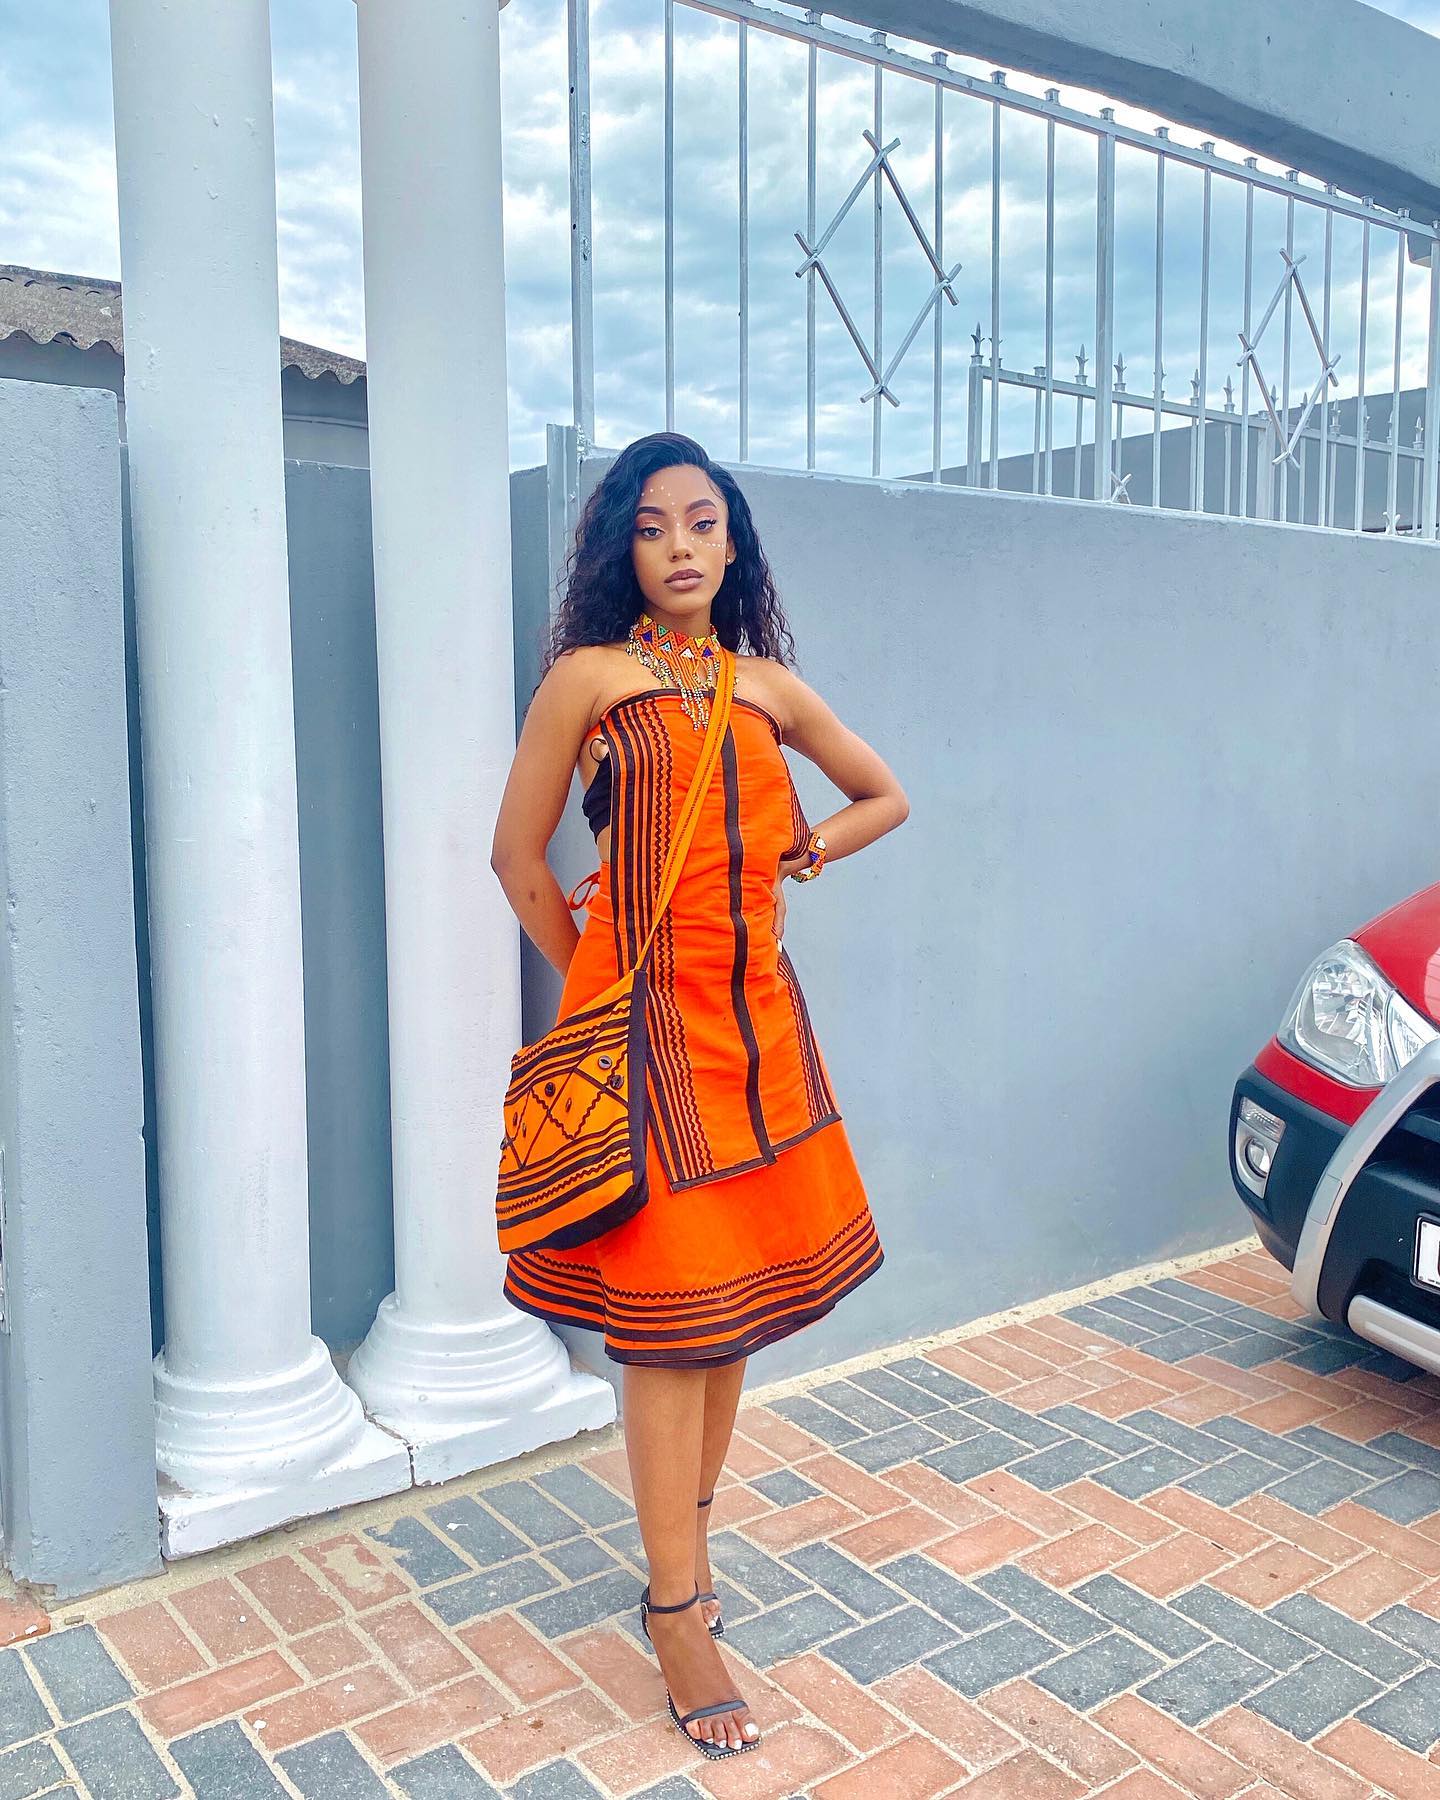 Wearing Xhosa Heritage: Dresses that Sing with Cultural Pride 23